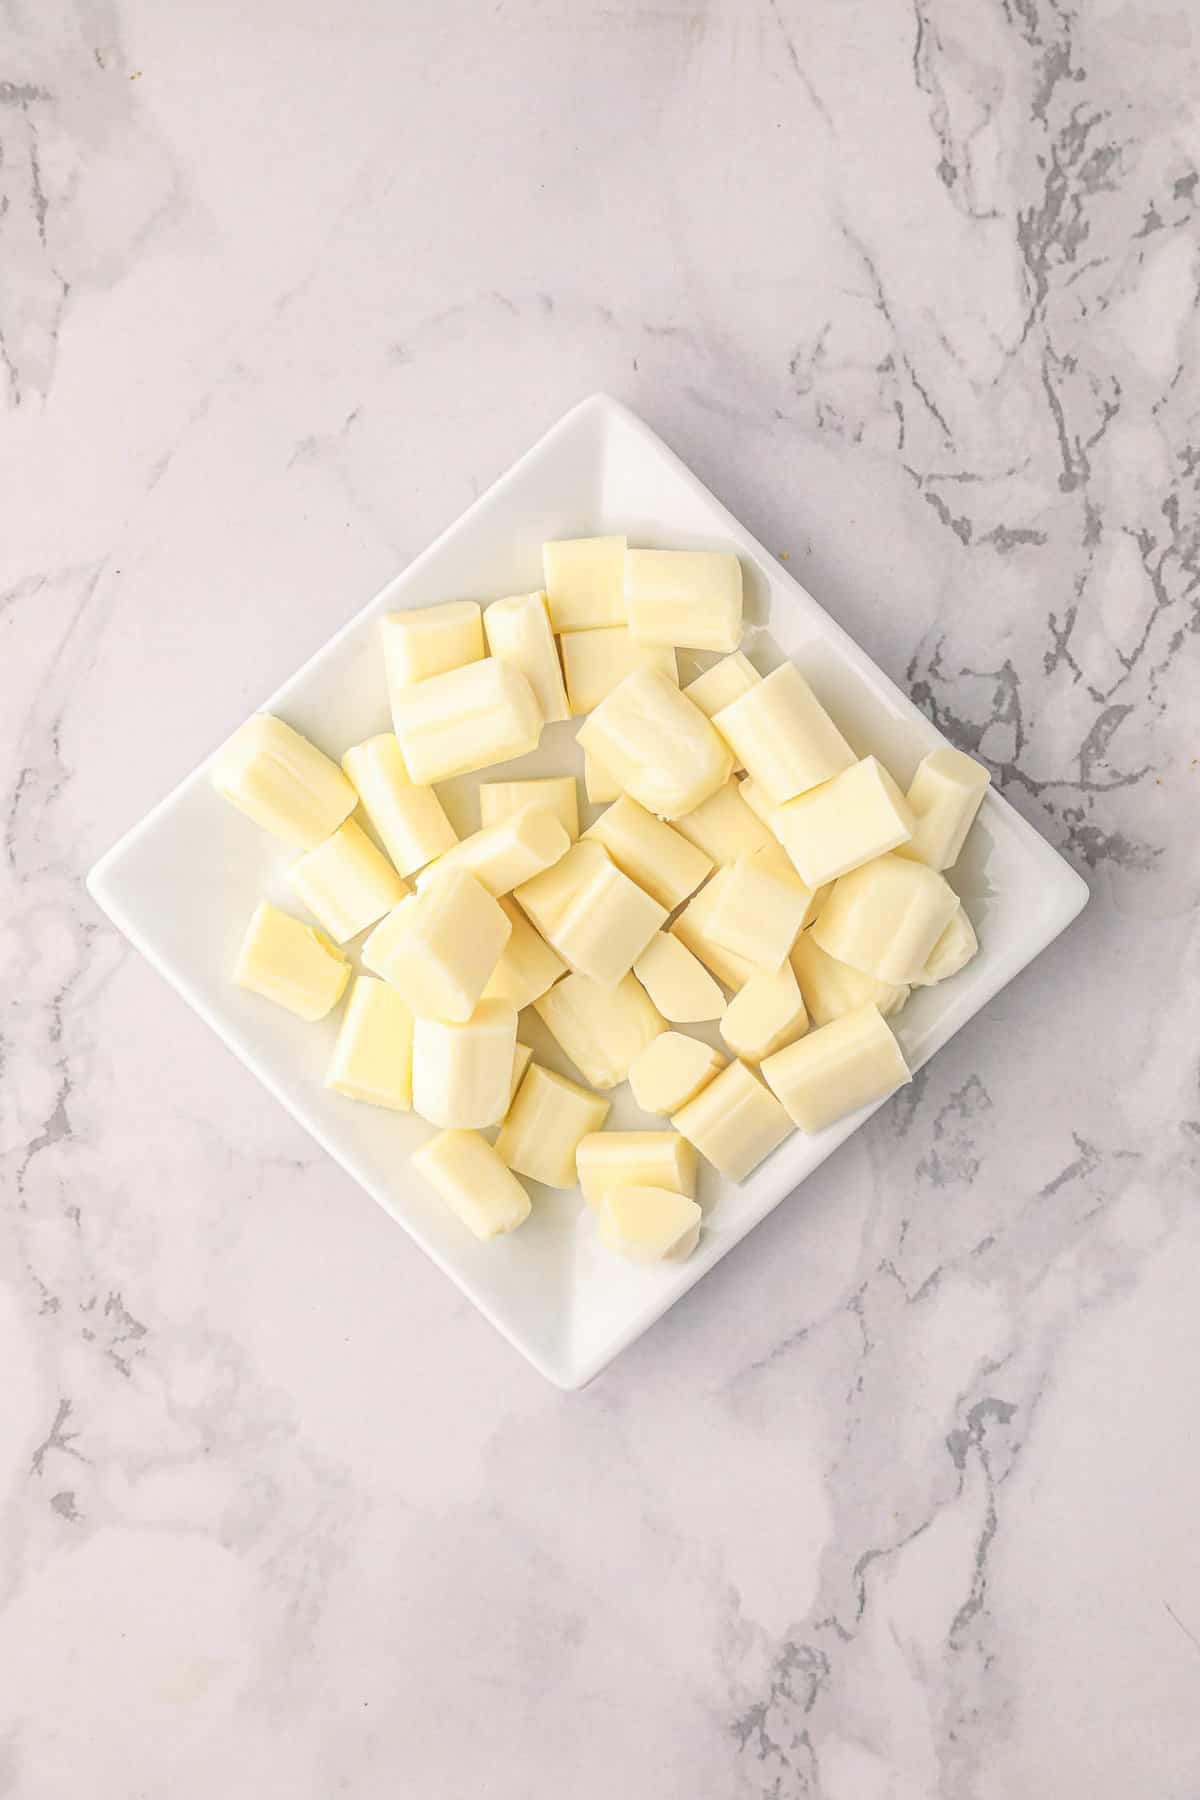 Cubed string cheese chunks for Smoked Stuffed Meatballs recipe